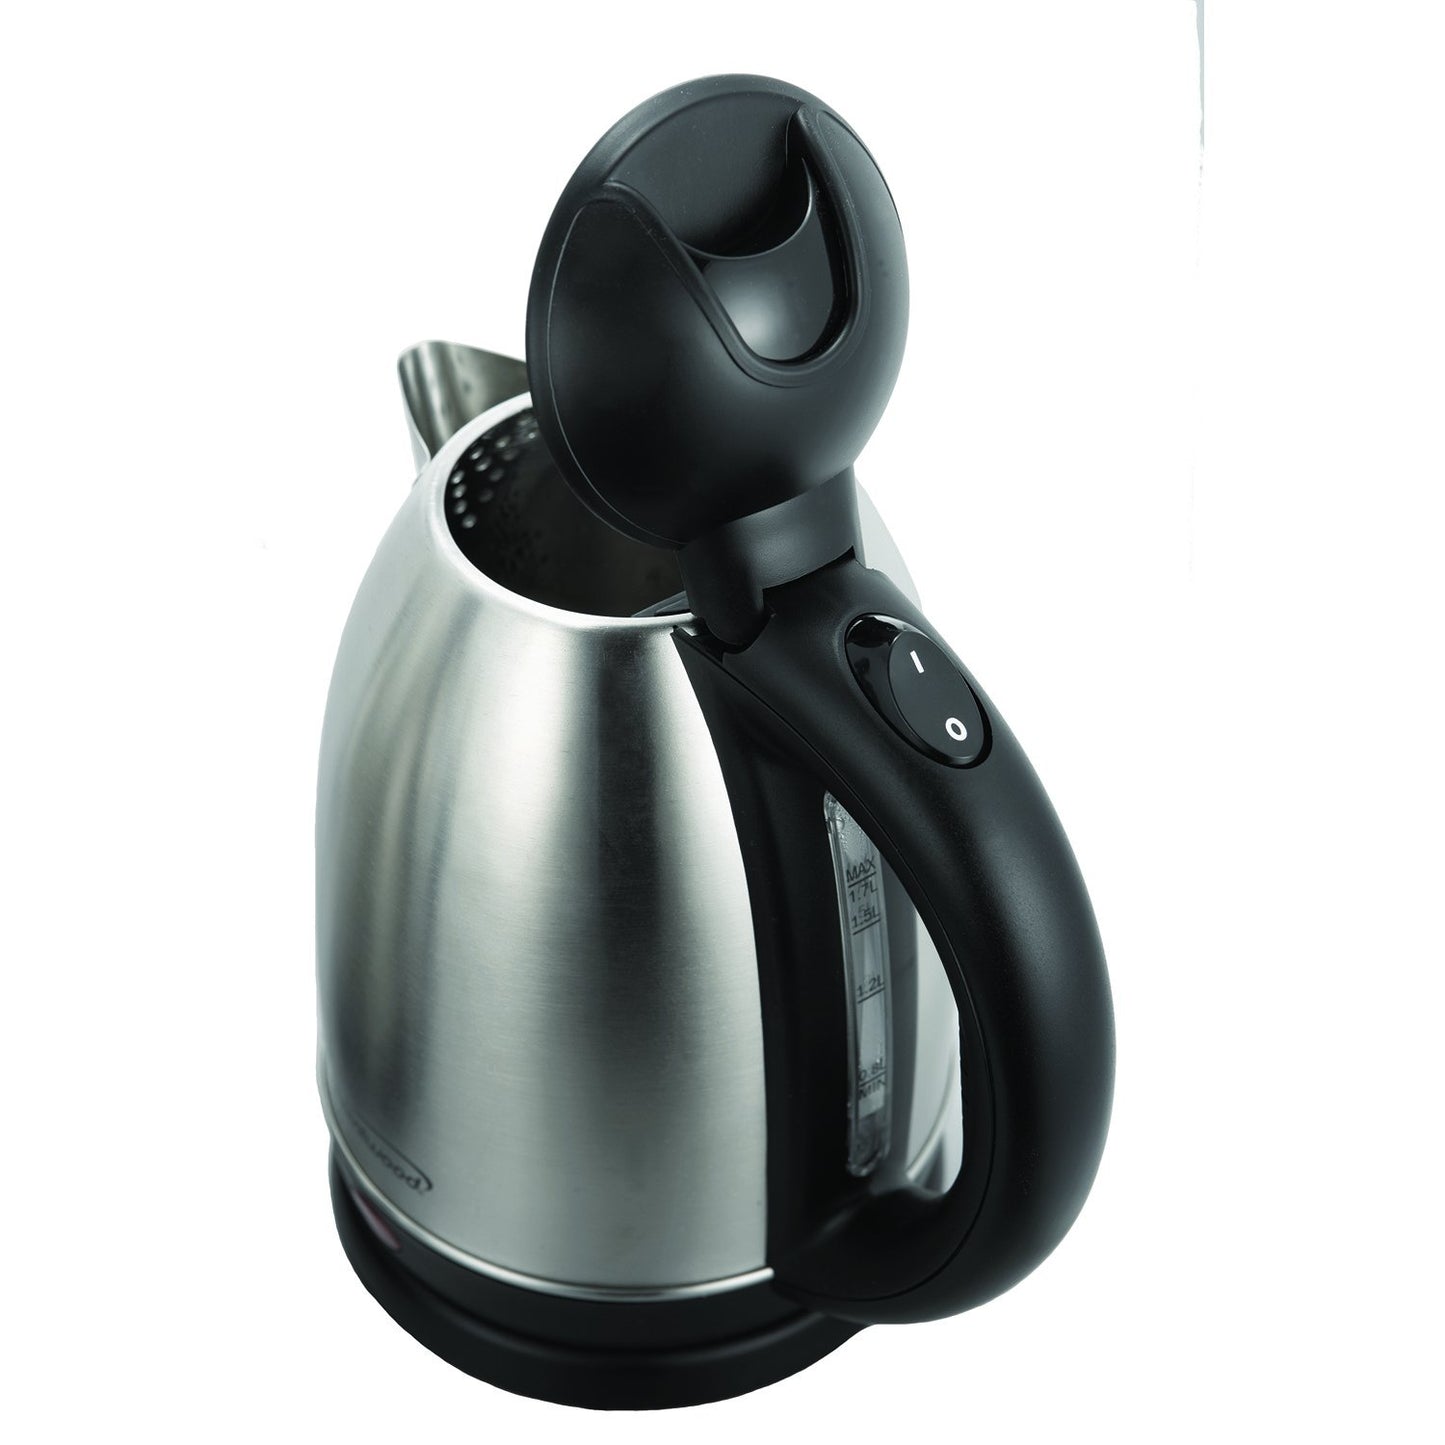 Brentwood Appl. KT-1790 1.7L Stainless Steel Cordless Electric Kettle